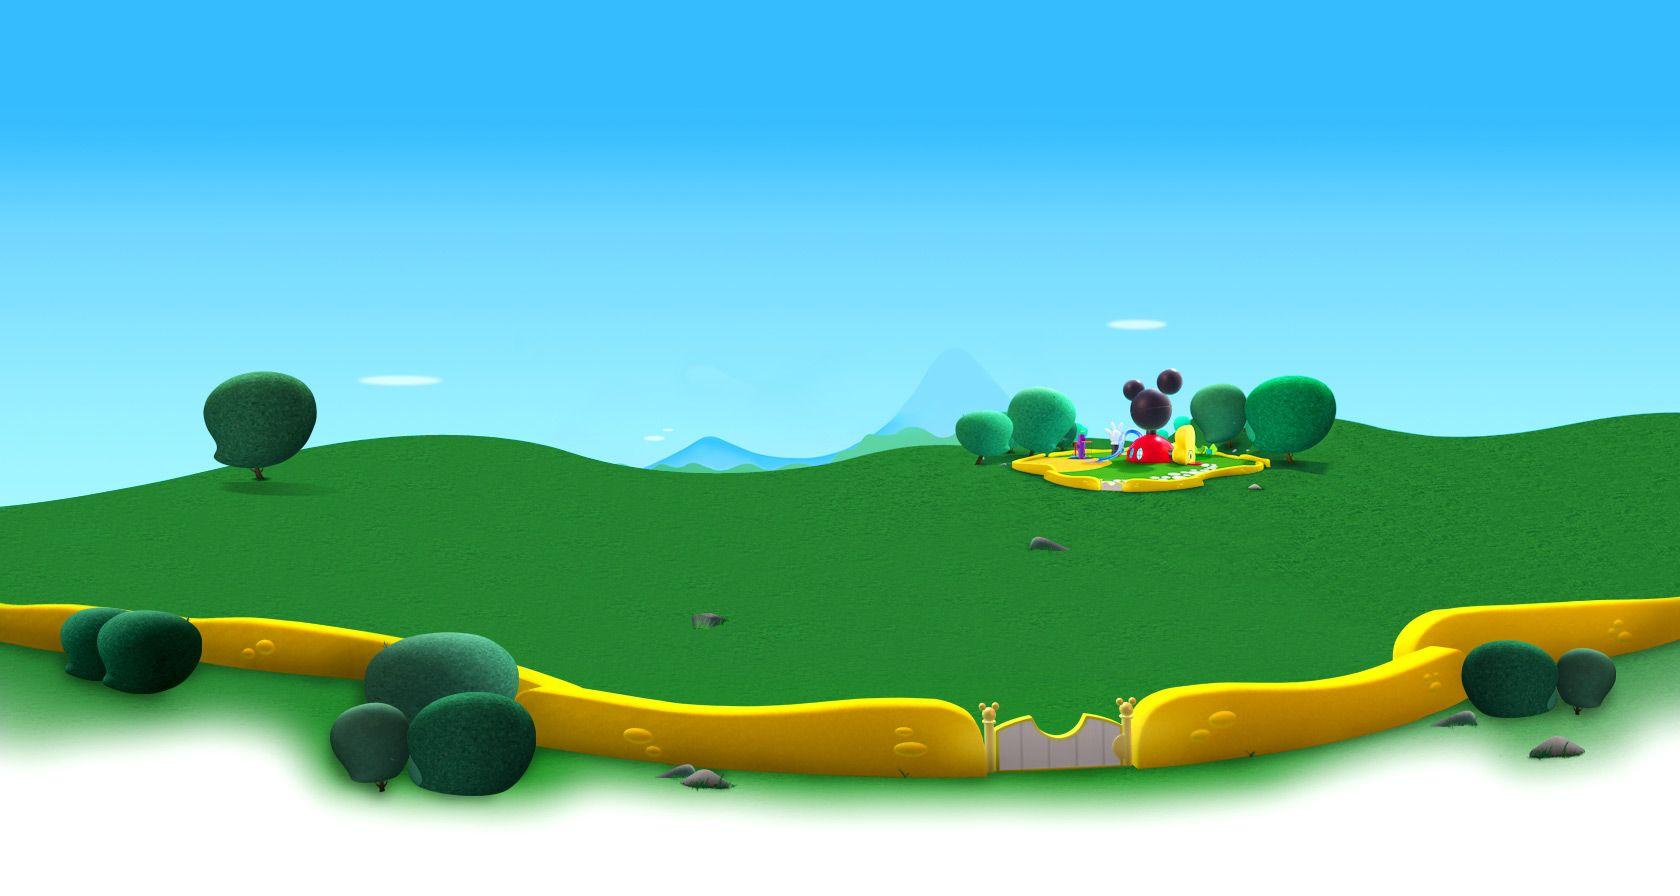 Mickey Mouse Clubhouse Wallpapers